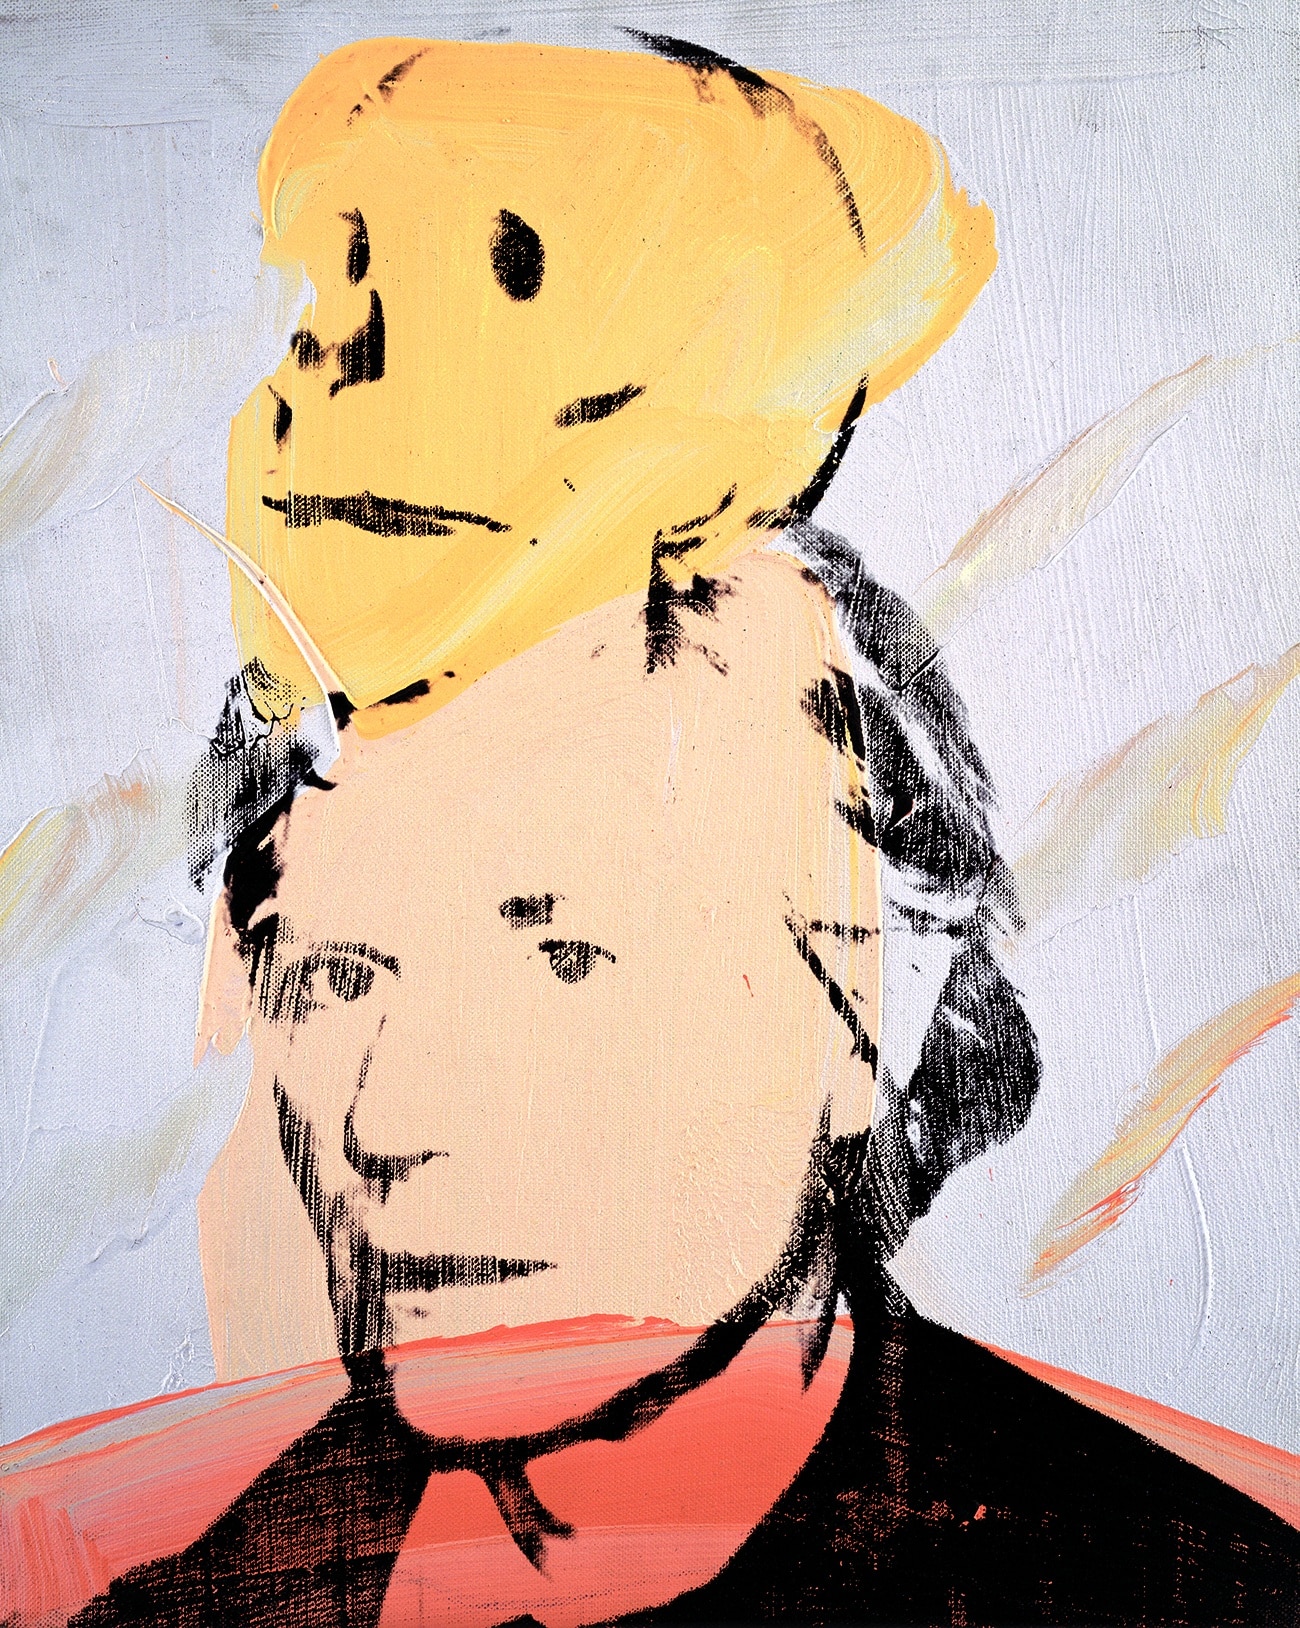 Andy Warhol's Self-Portrait with Skull, 1978. 